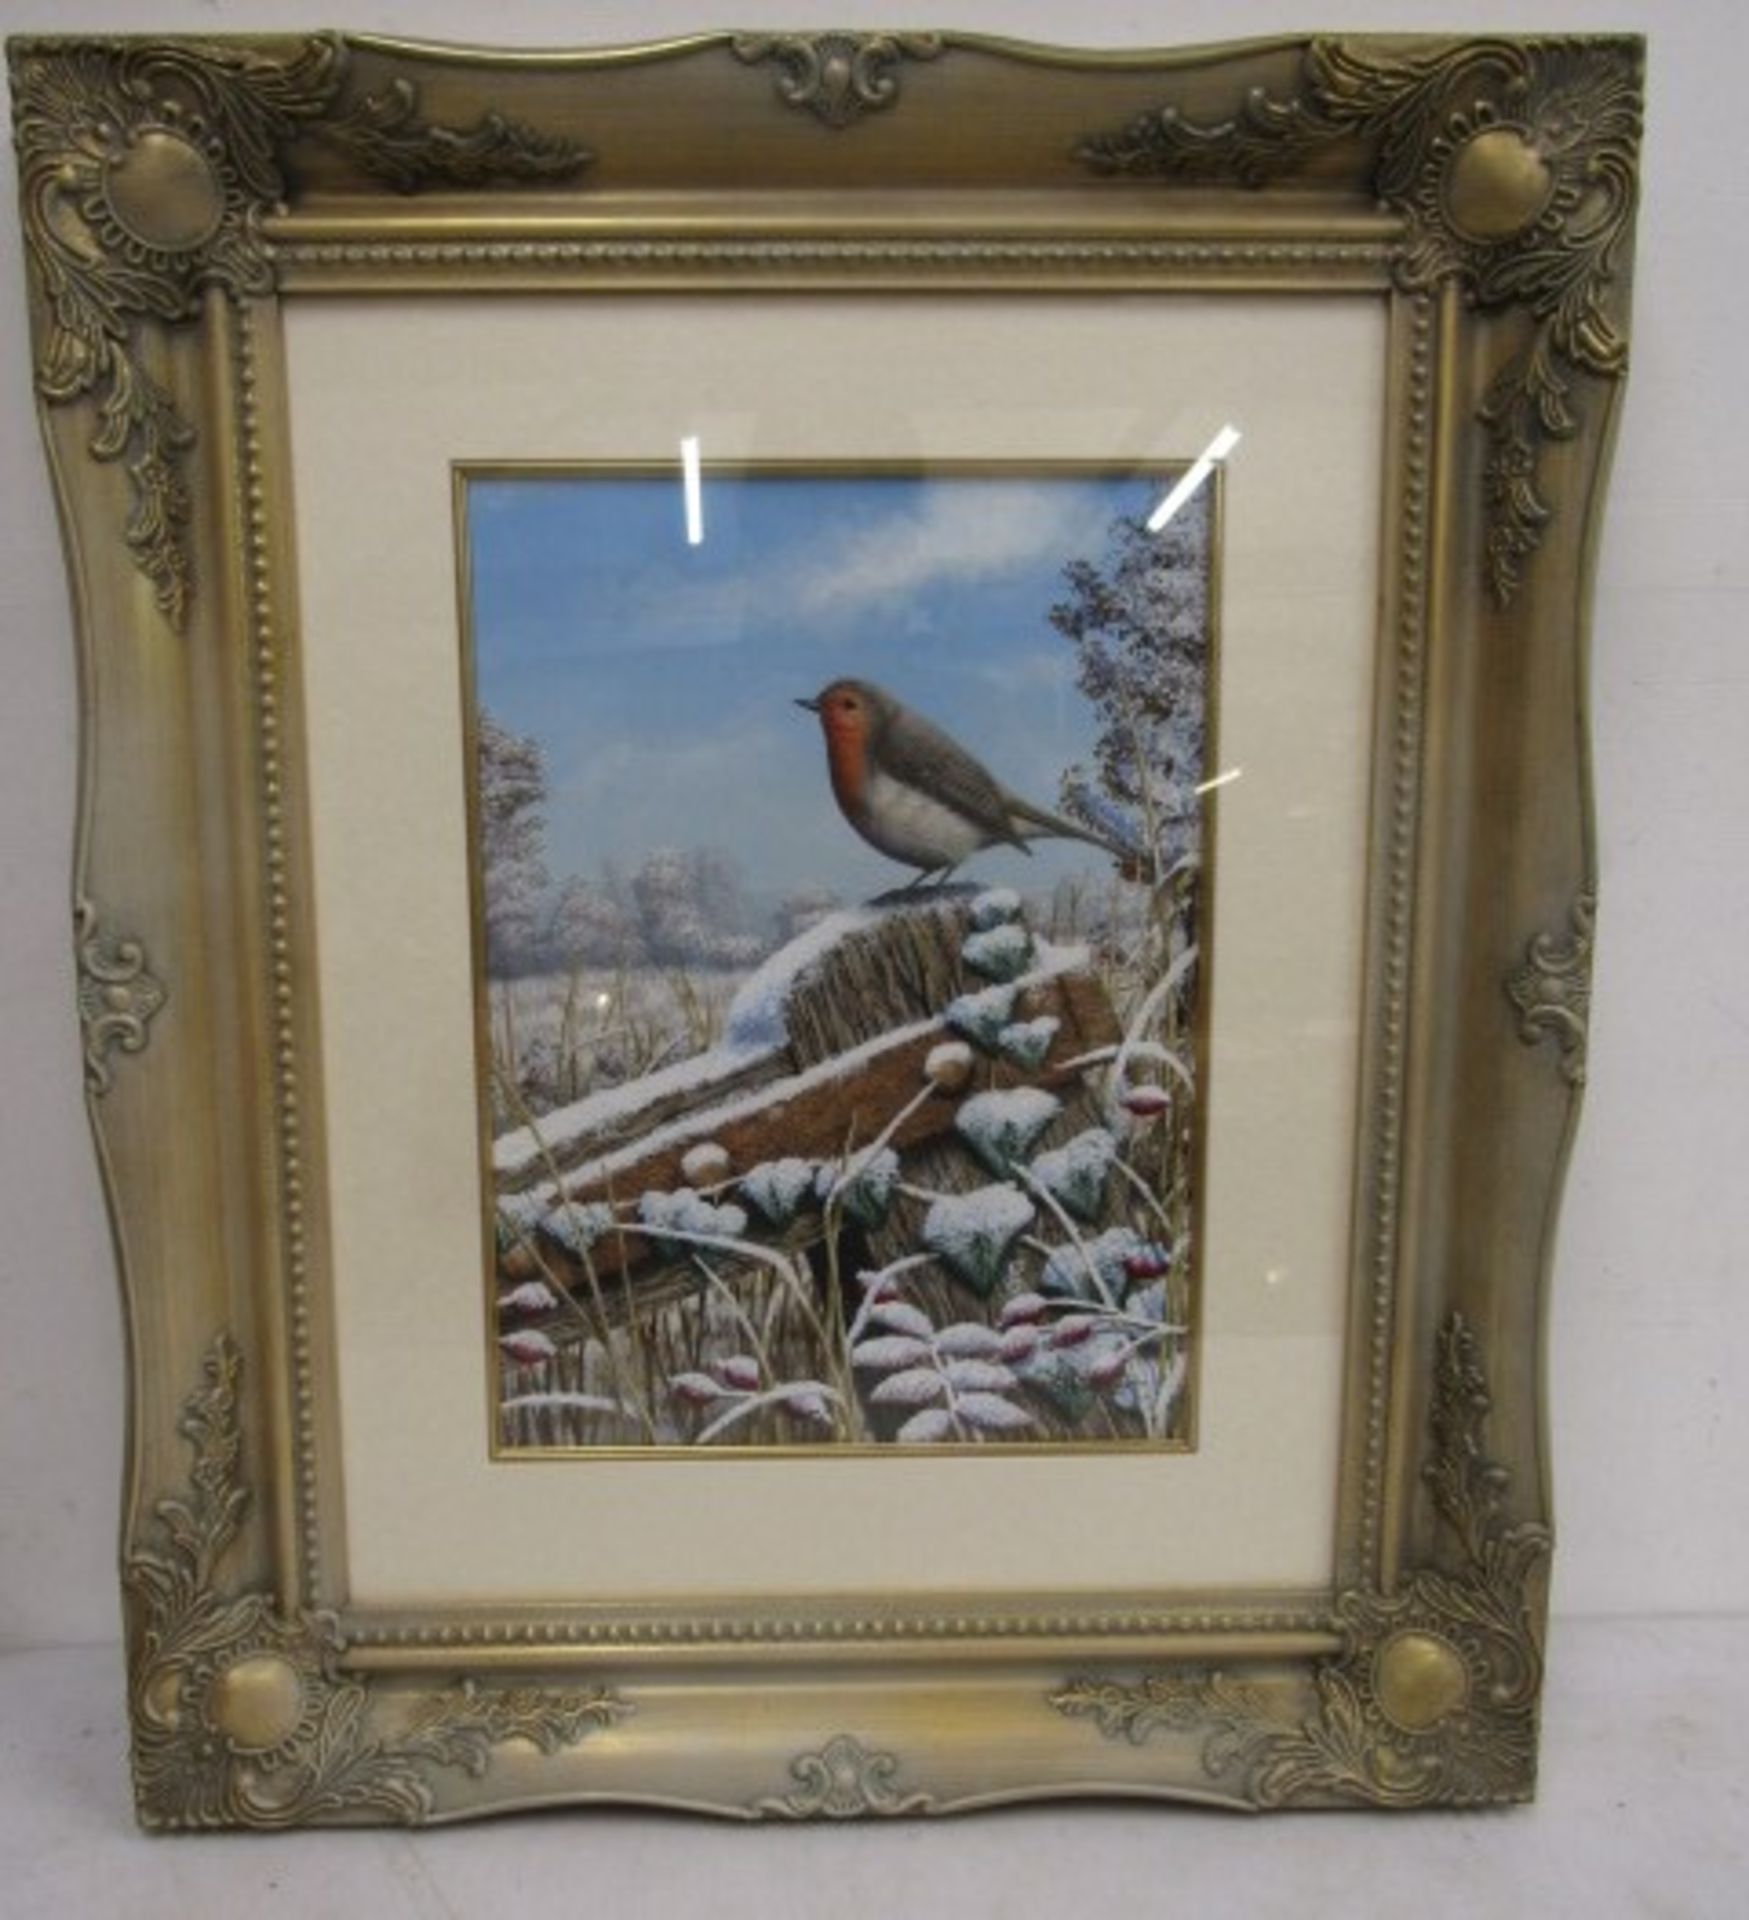 Mark Chester watercolour 'The Old Gate Robin' an original by the wildlife artist in an ornate